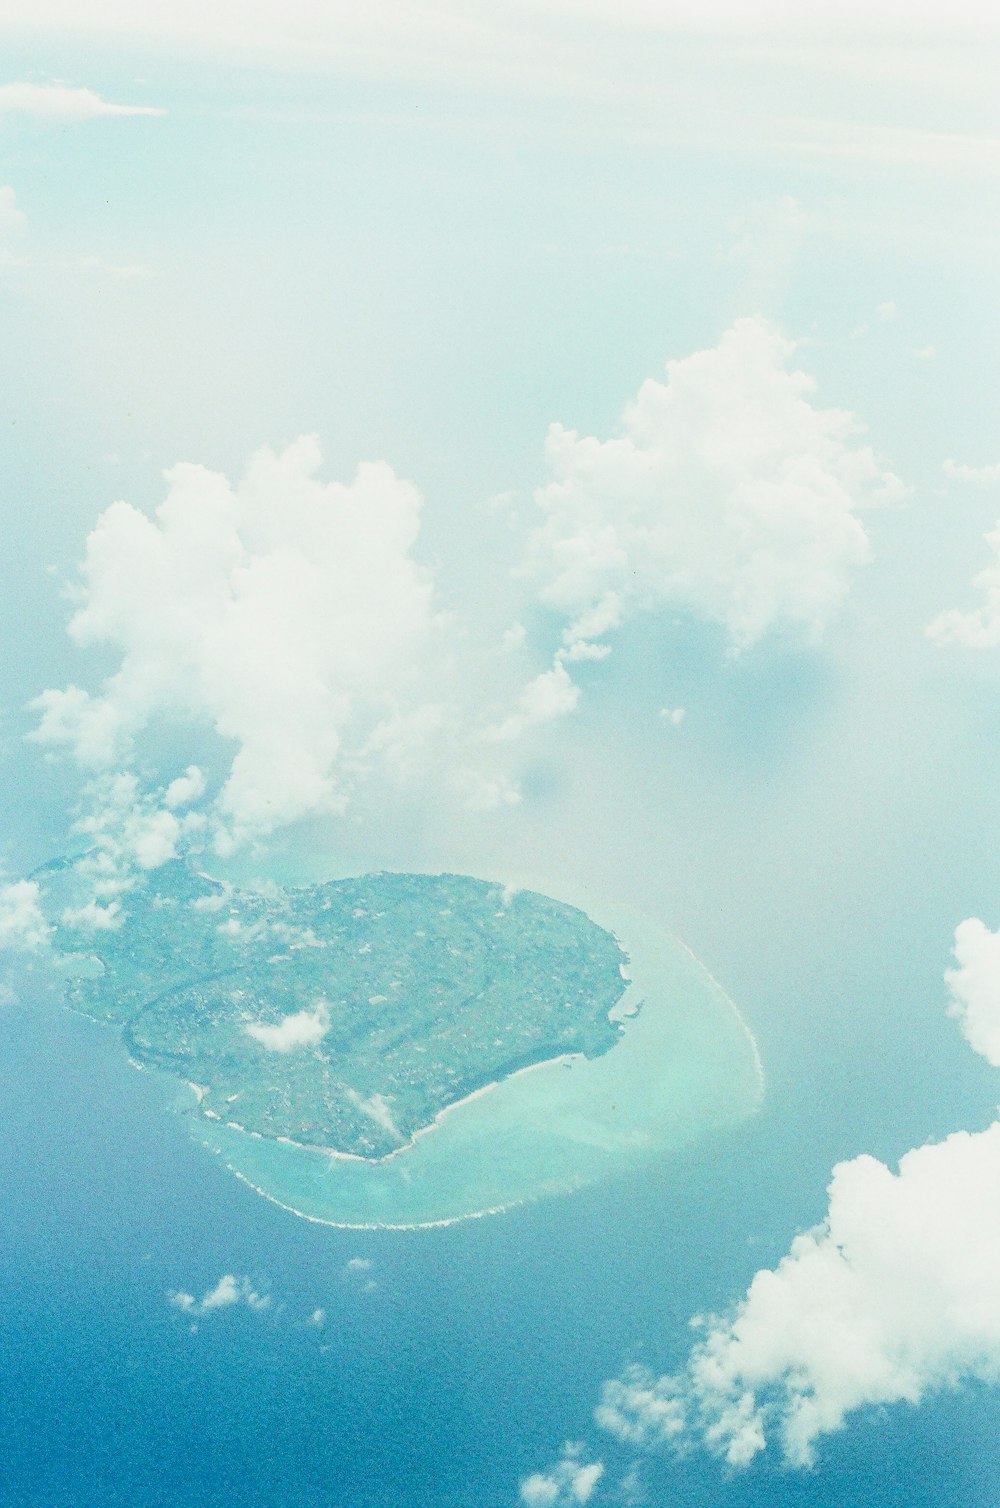 aerial view of island surrounded by sea of clouds